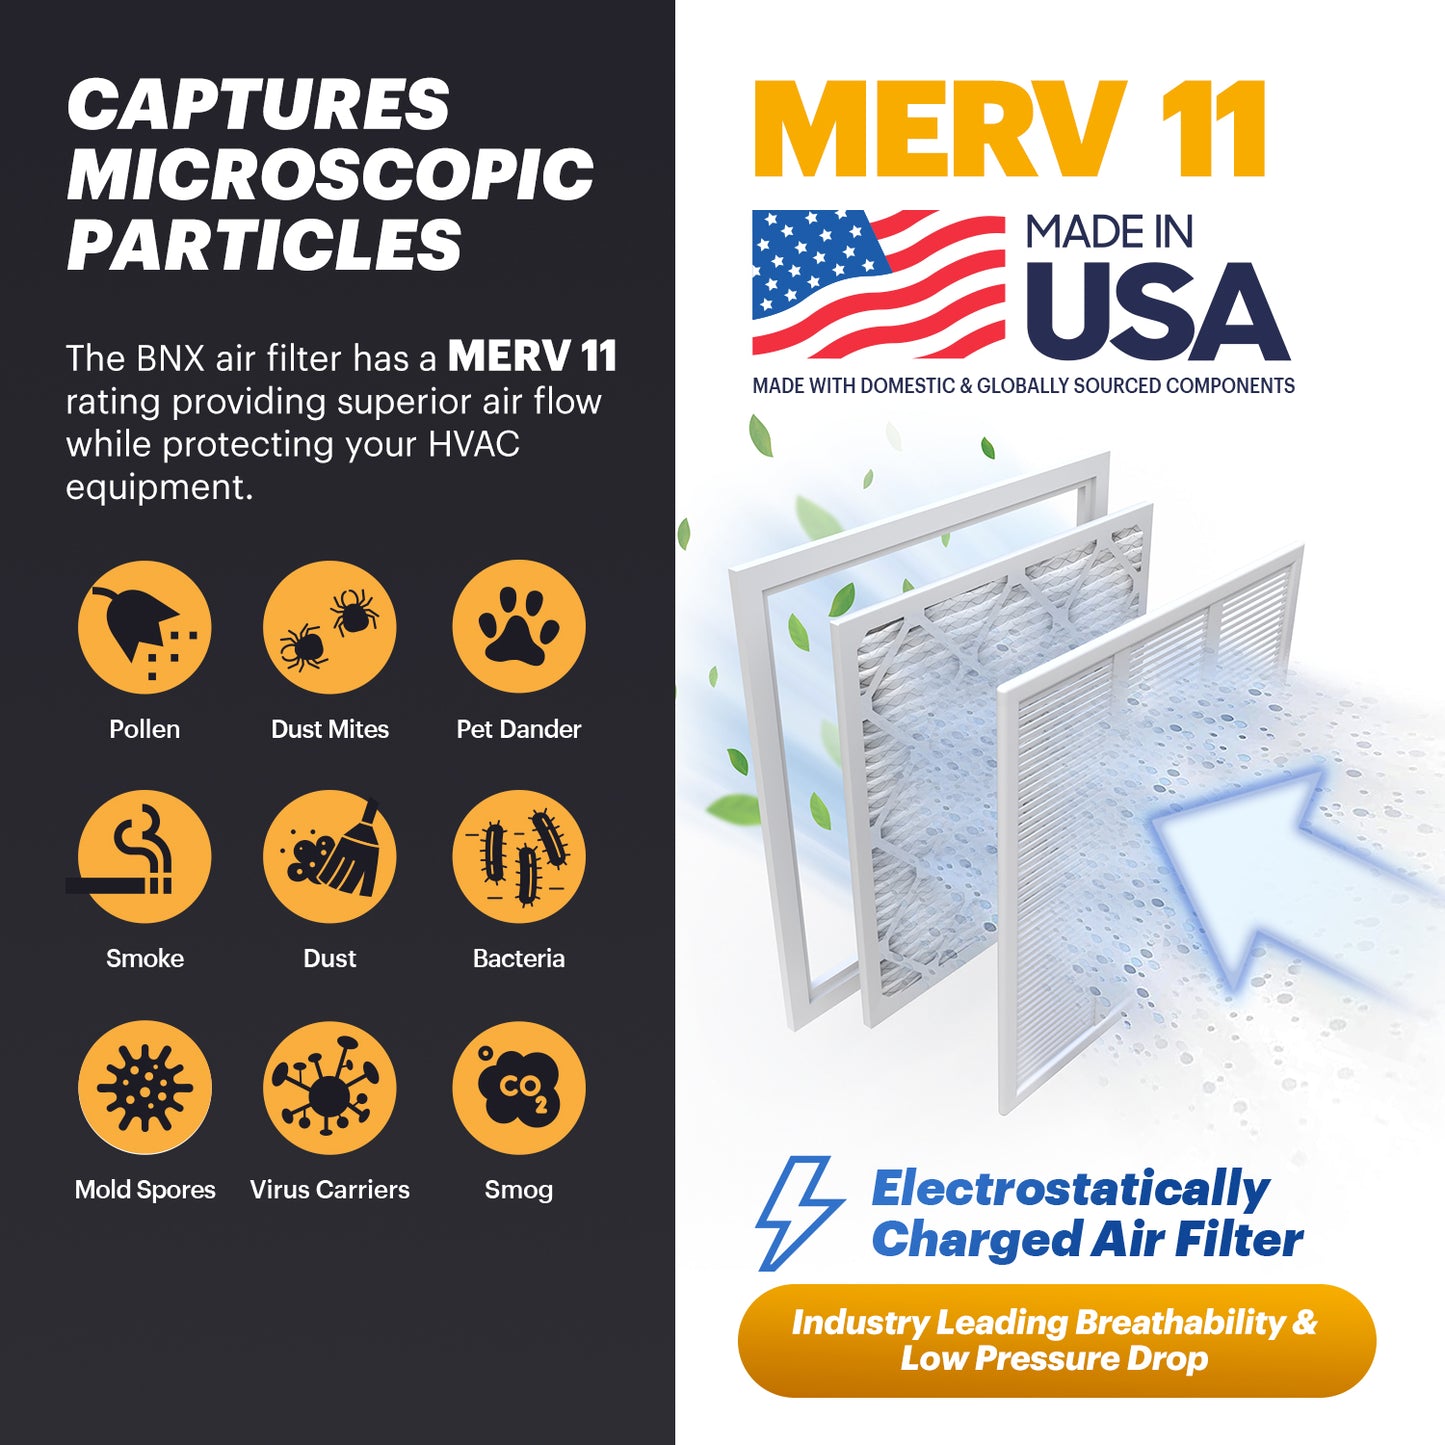 BNX 14x20x1 MERV 11 Air Filter 6 Pack - MADE IN USA - Electrostatic Pleated Air Conditioner HVAC AC Furnace Filters - Removes Dust, Mold, Pollen, Lint, Pet Dander, Smoke, Smog